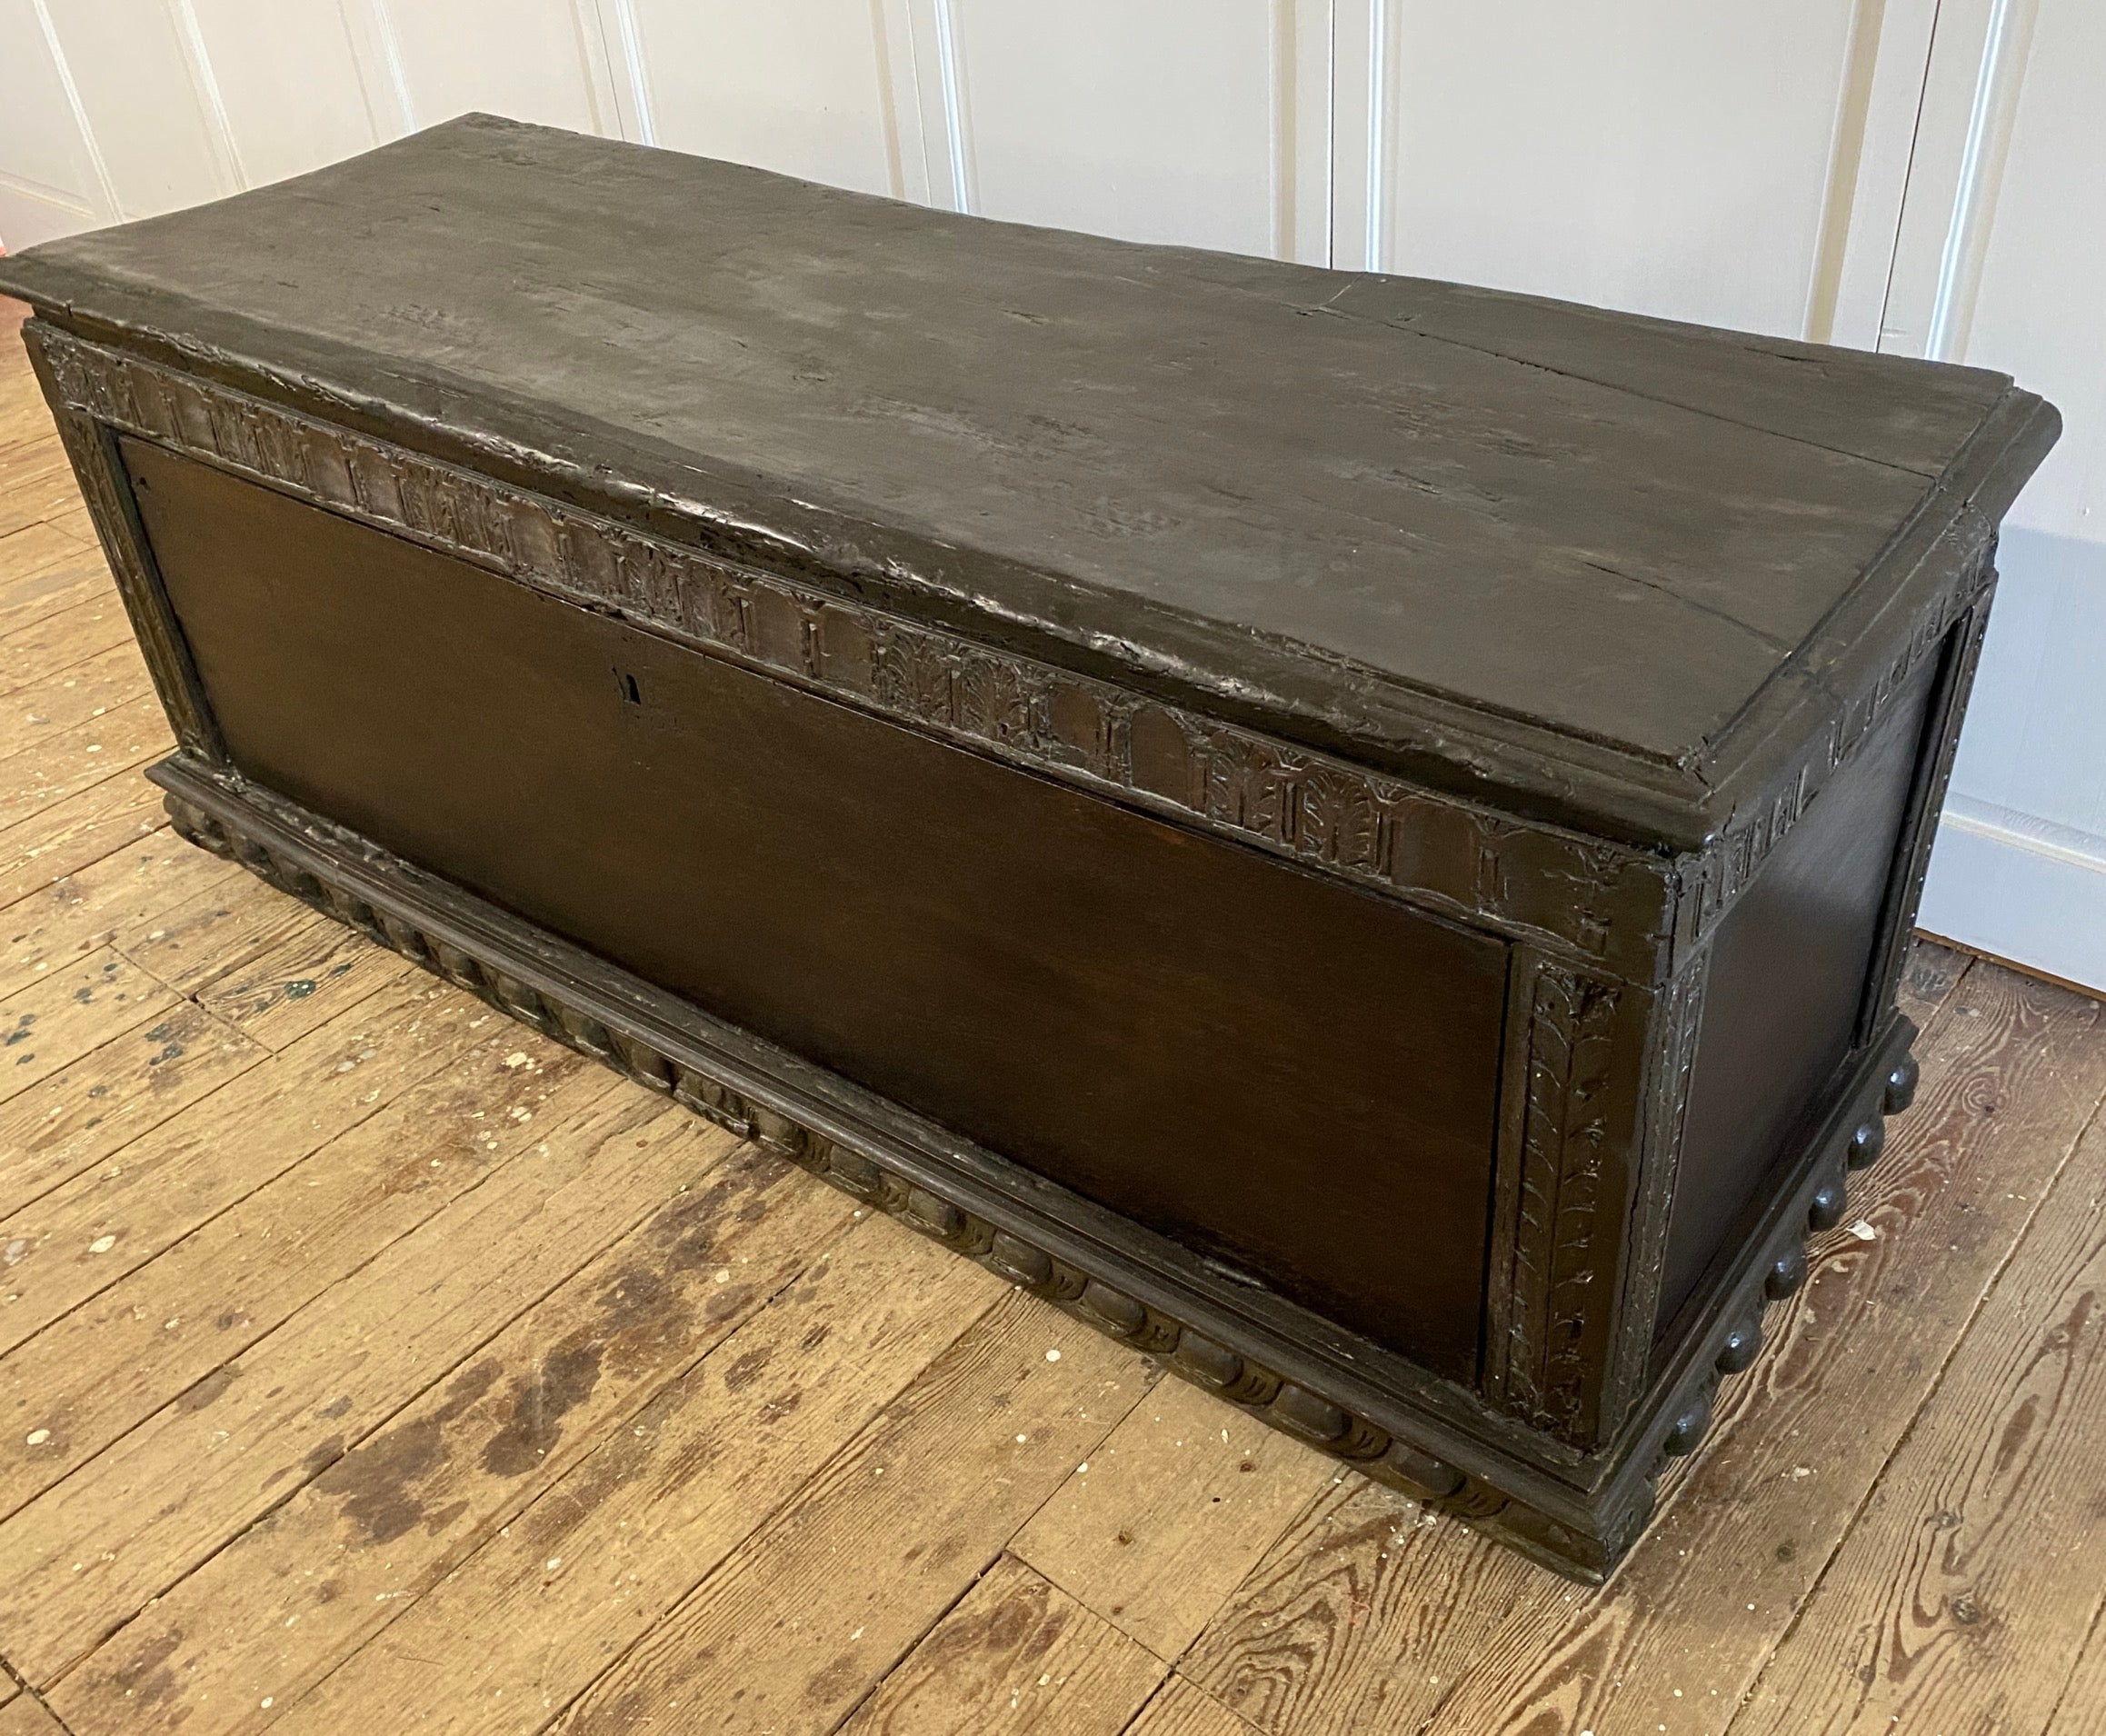 A wonderfully rustic early Italian hand carved cassone with egg and dart moulded frame, time-softened wood and solid panels on the front and sides. Although this chest has suffered wood worm damage, losses to various areas and repairs made, it has